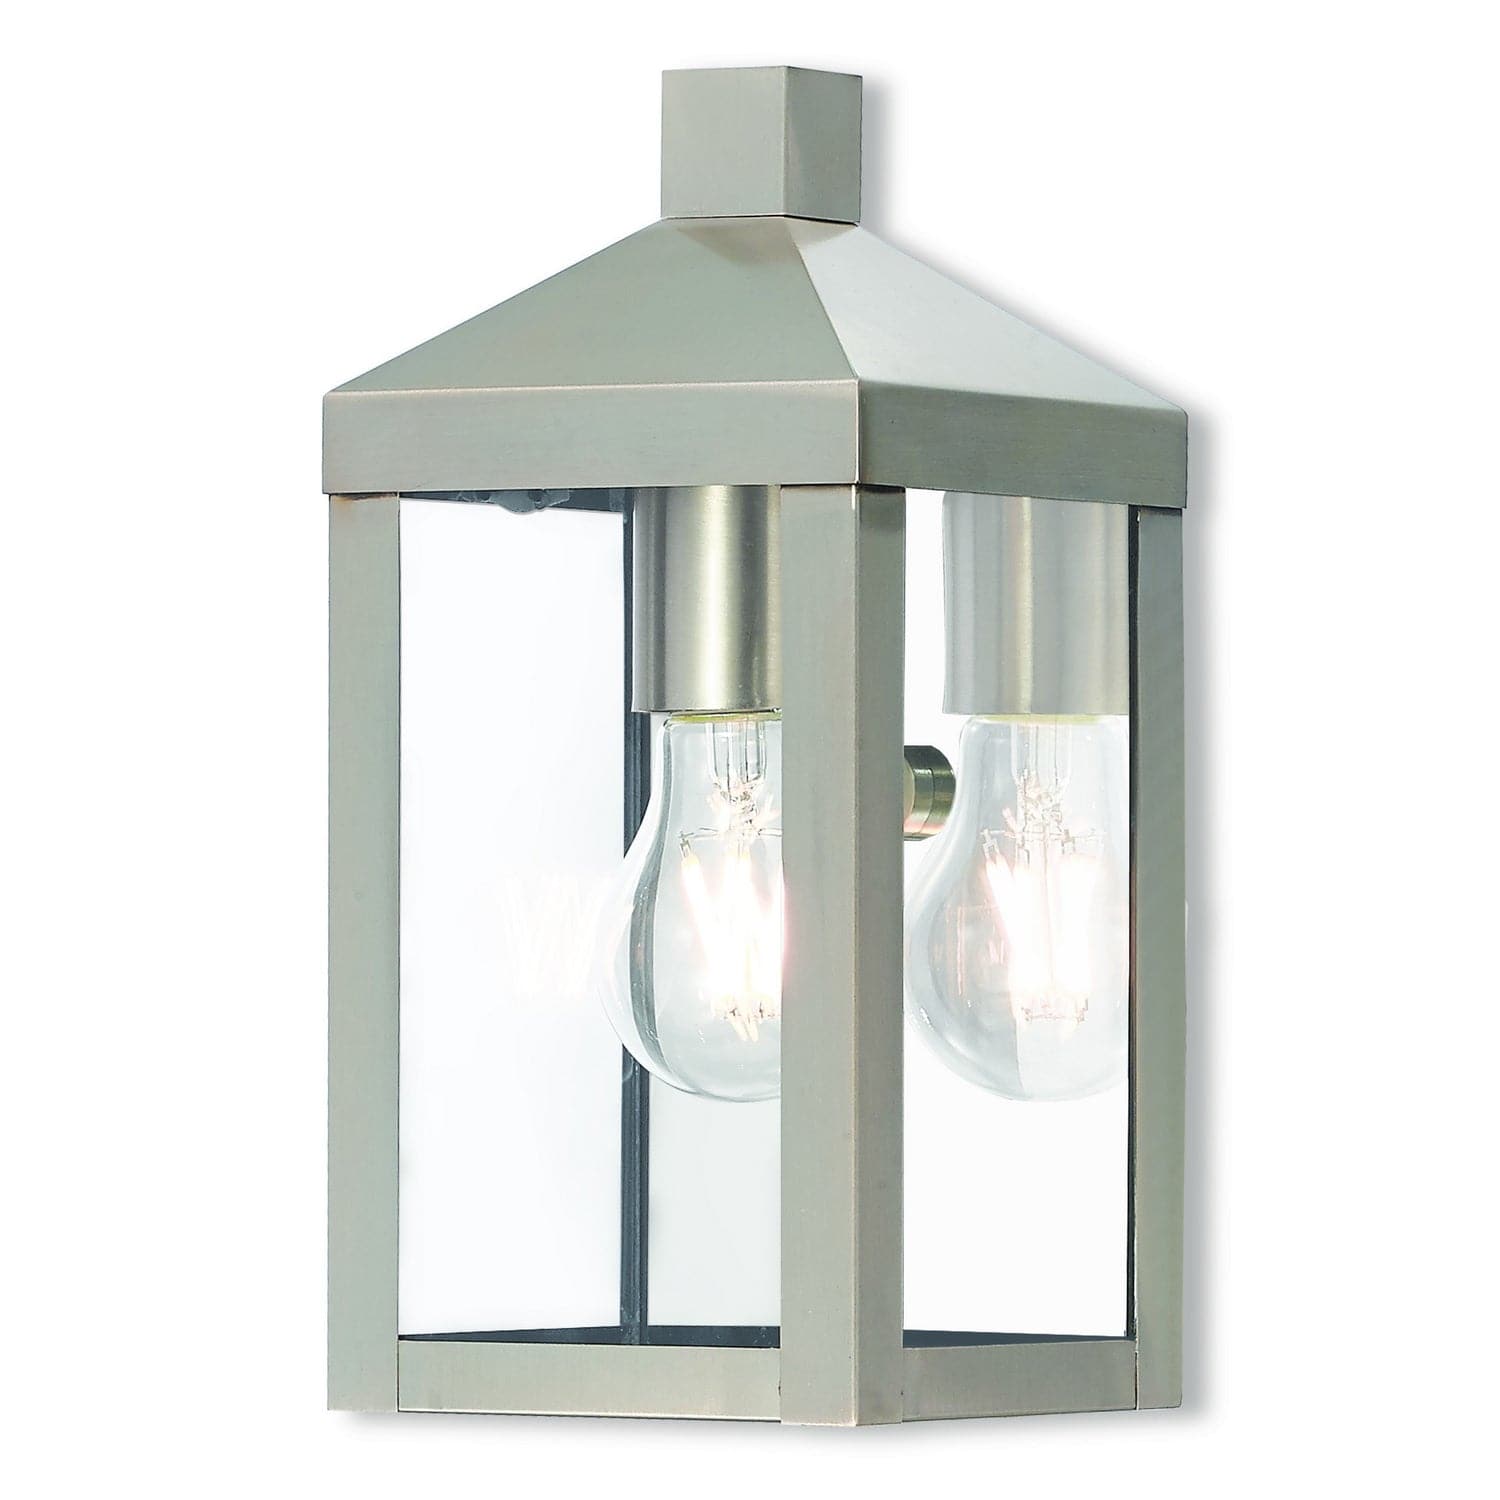 Livex Lighting - 20581-91 - One Light Outdoor Wall Lantern - Nyack - Brushed Nickel w/ Polished Chrome Stainless Steel